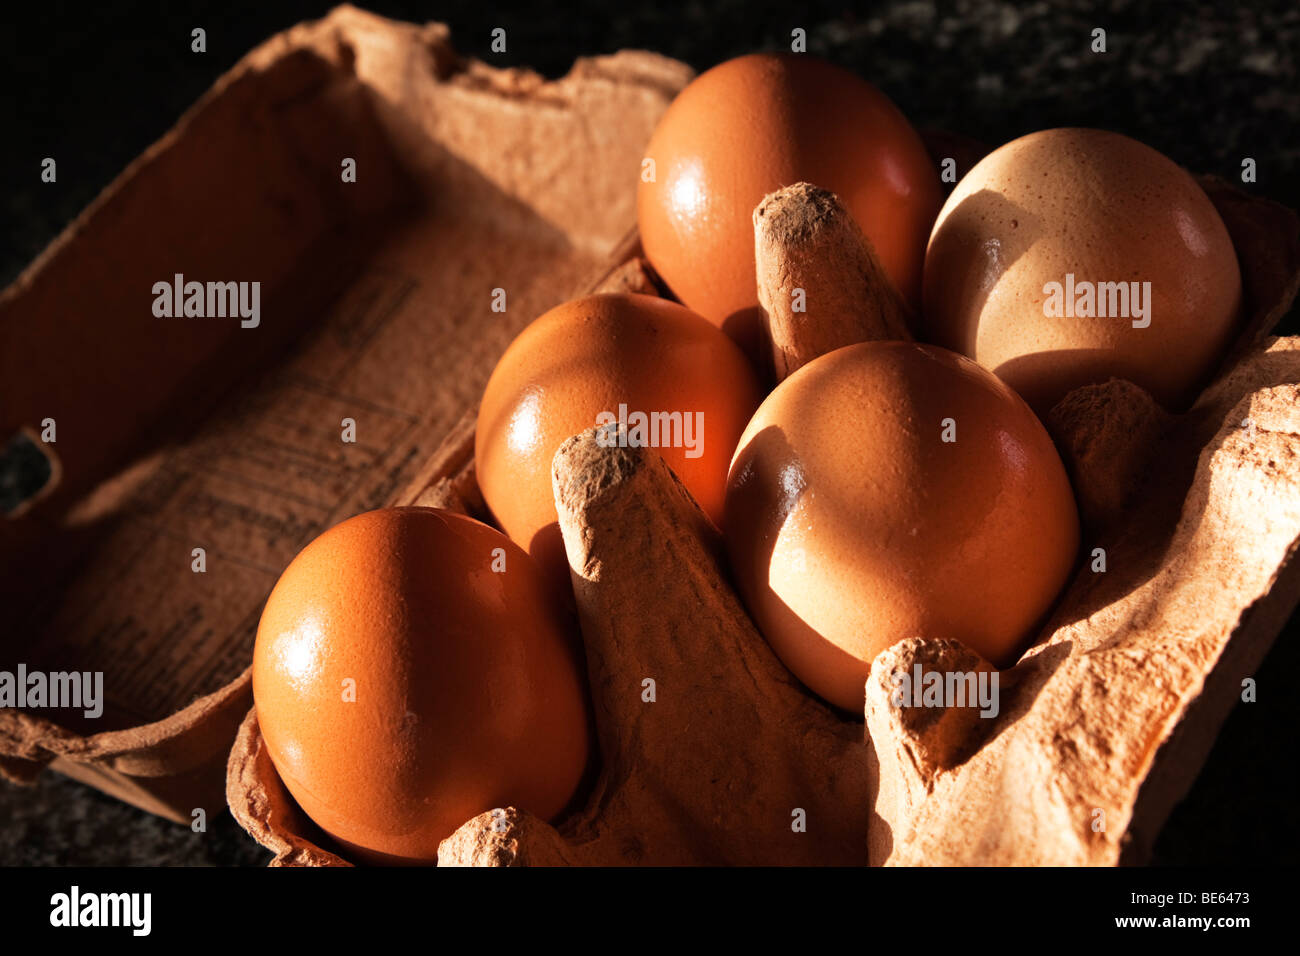 Five eggs in recycled container Stock Photo